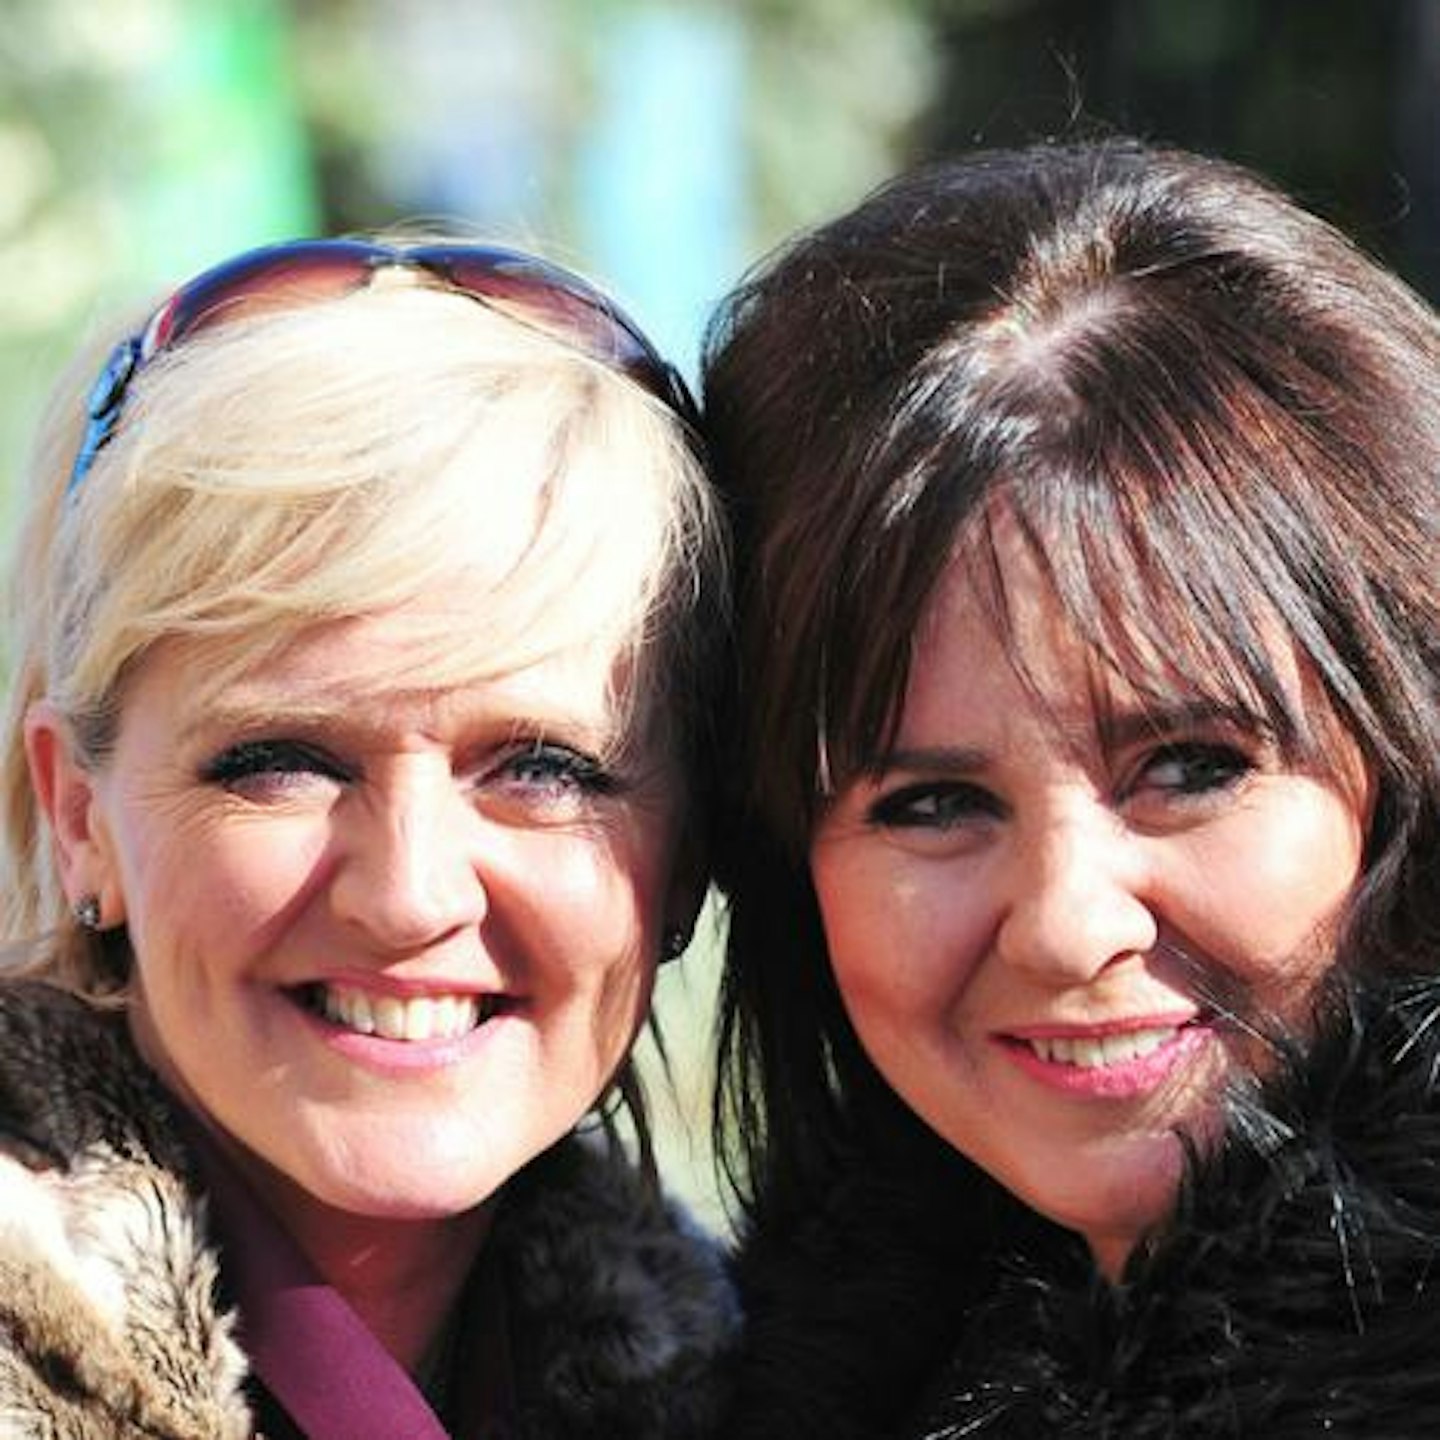 Coleen took to Twitter to express her grief at losing sister Bernie